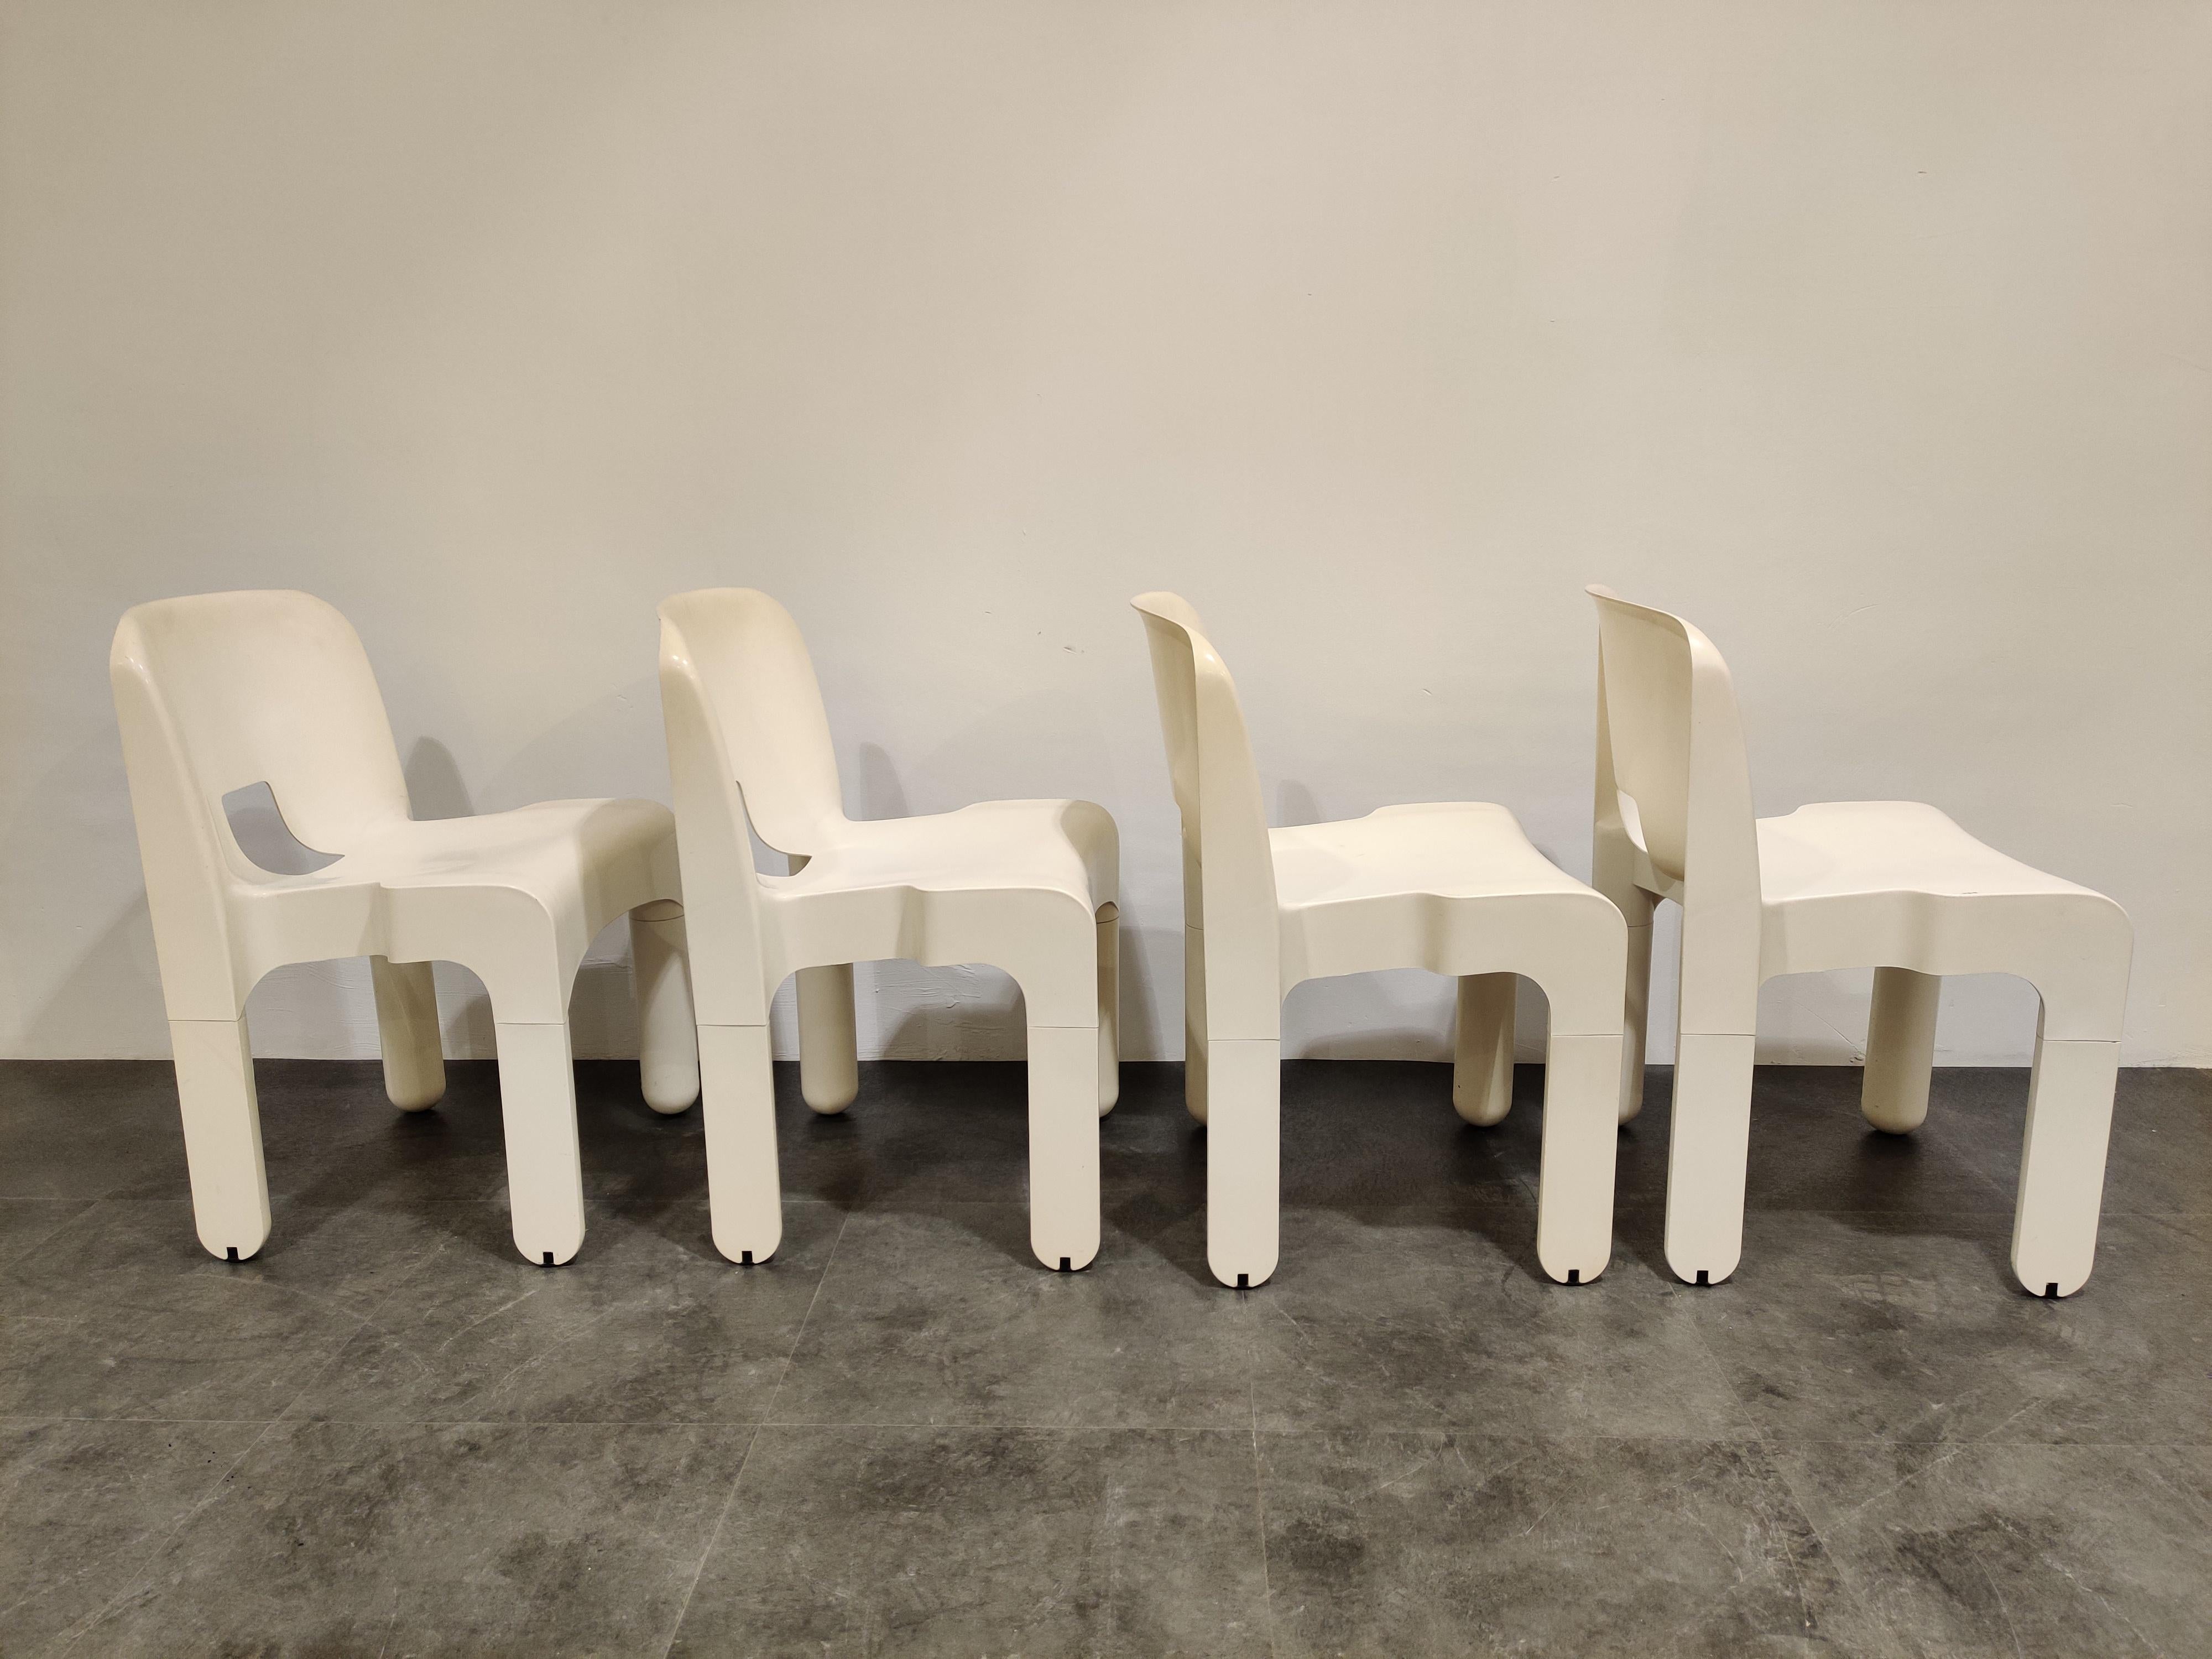 Space Age Universal Plastic Chairs Model 4869 by Joe Colombo for Kartell